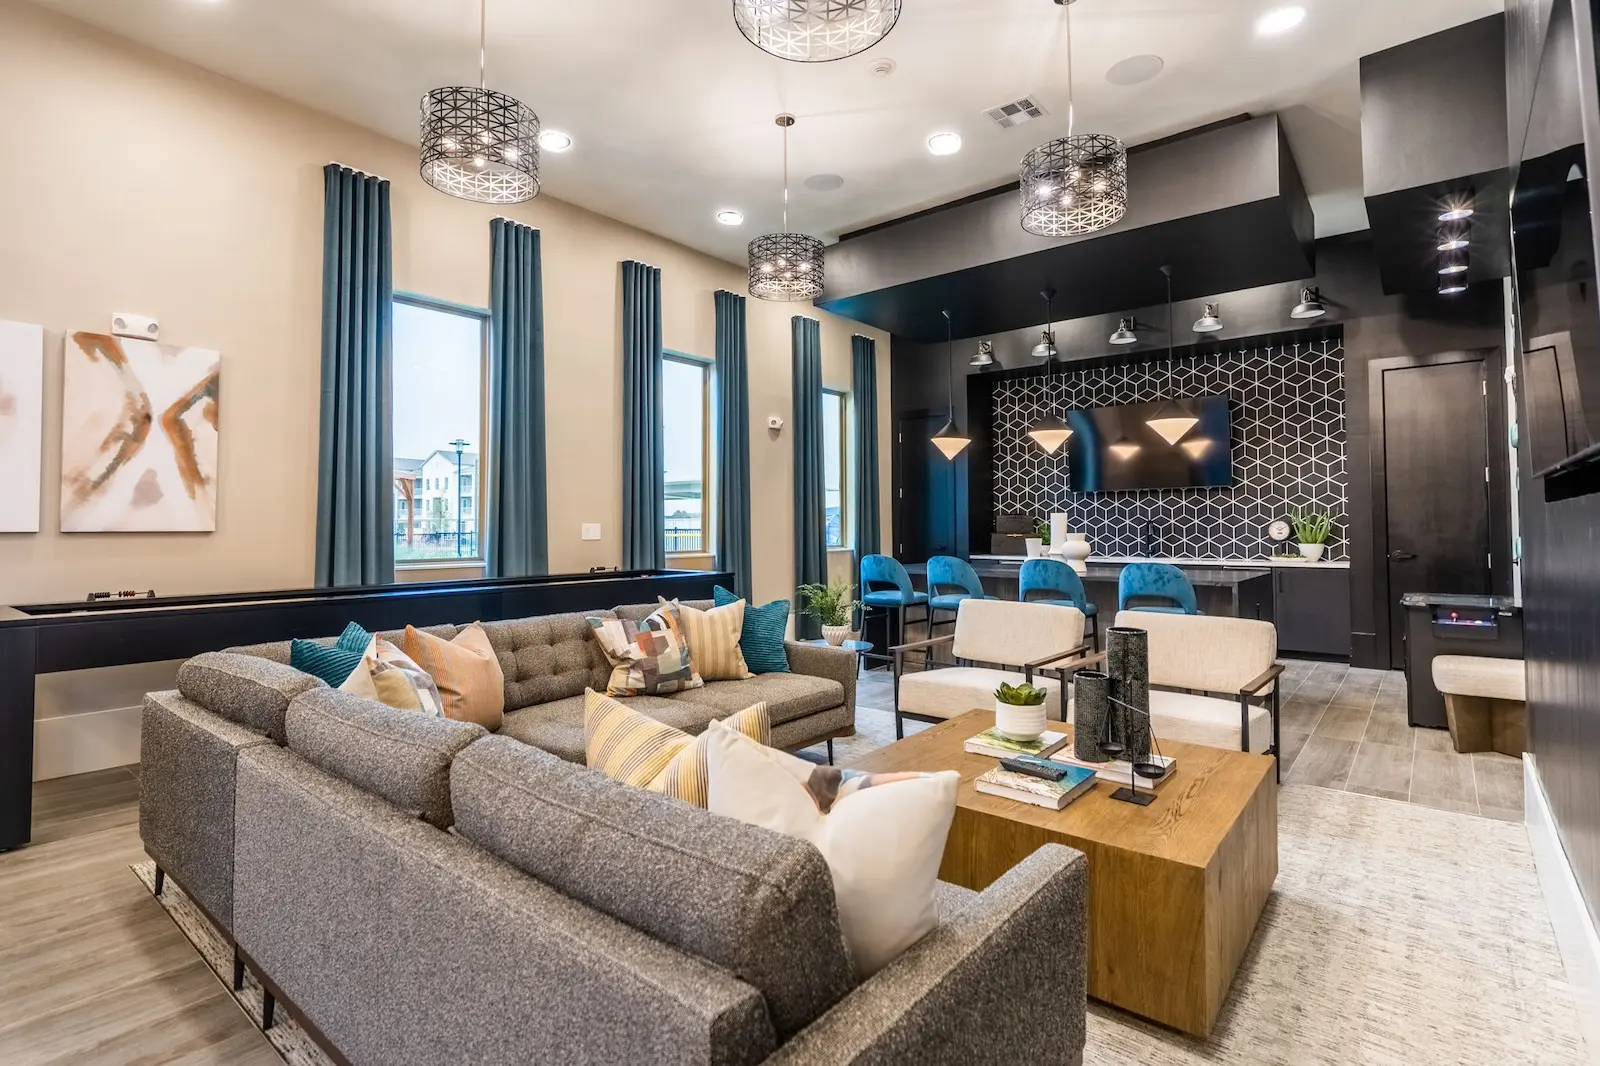 Social clubroom with lush seating, a kitchen, and a television at our apartments in Cypress.